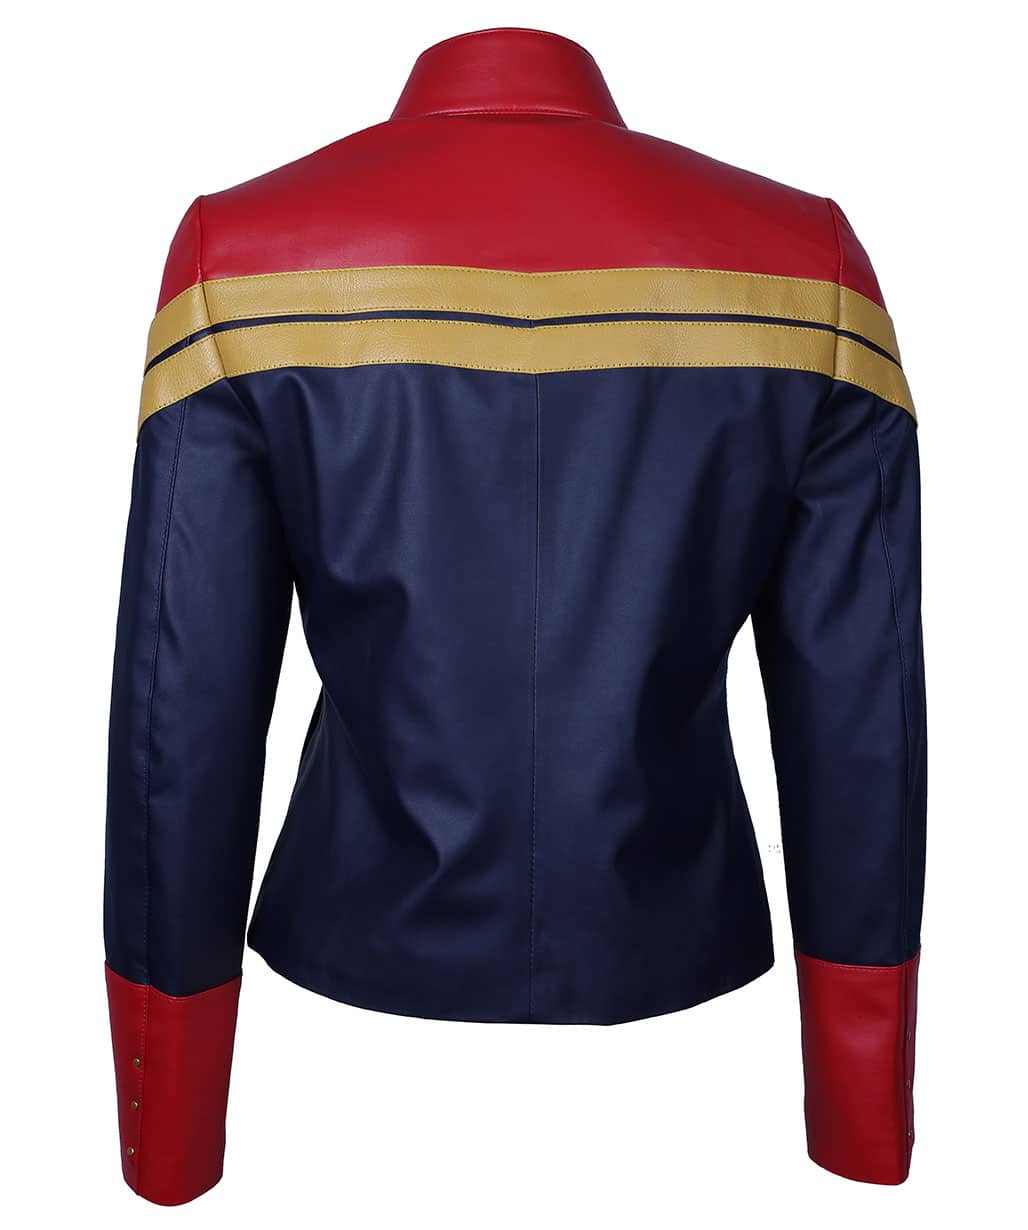 captain-marvel-brie-larson-leather-cosplay-jacket-back